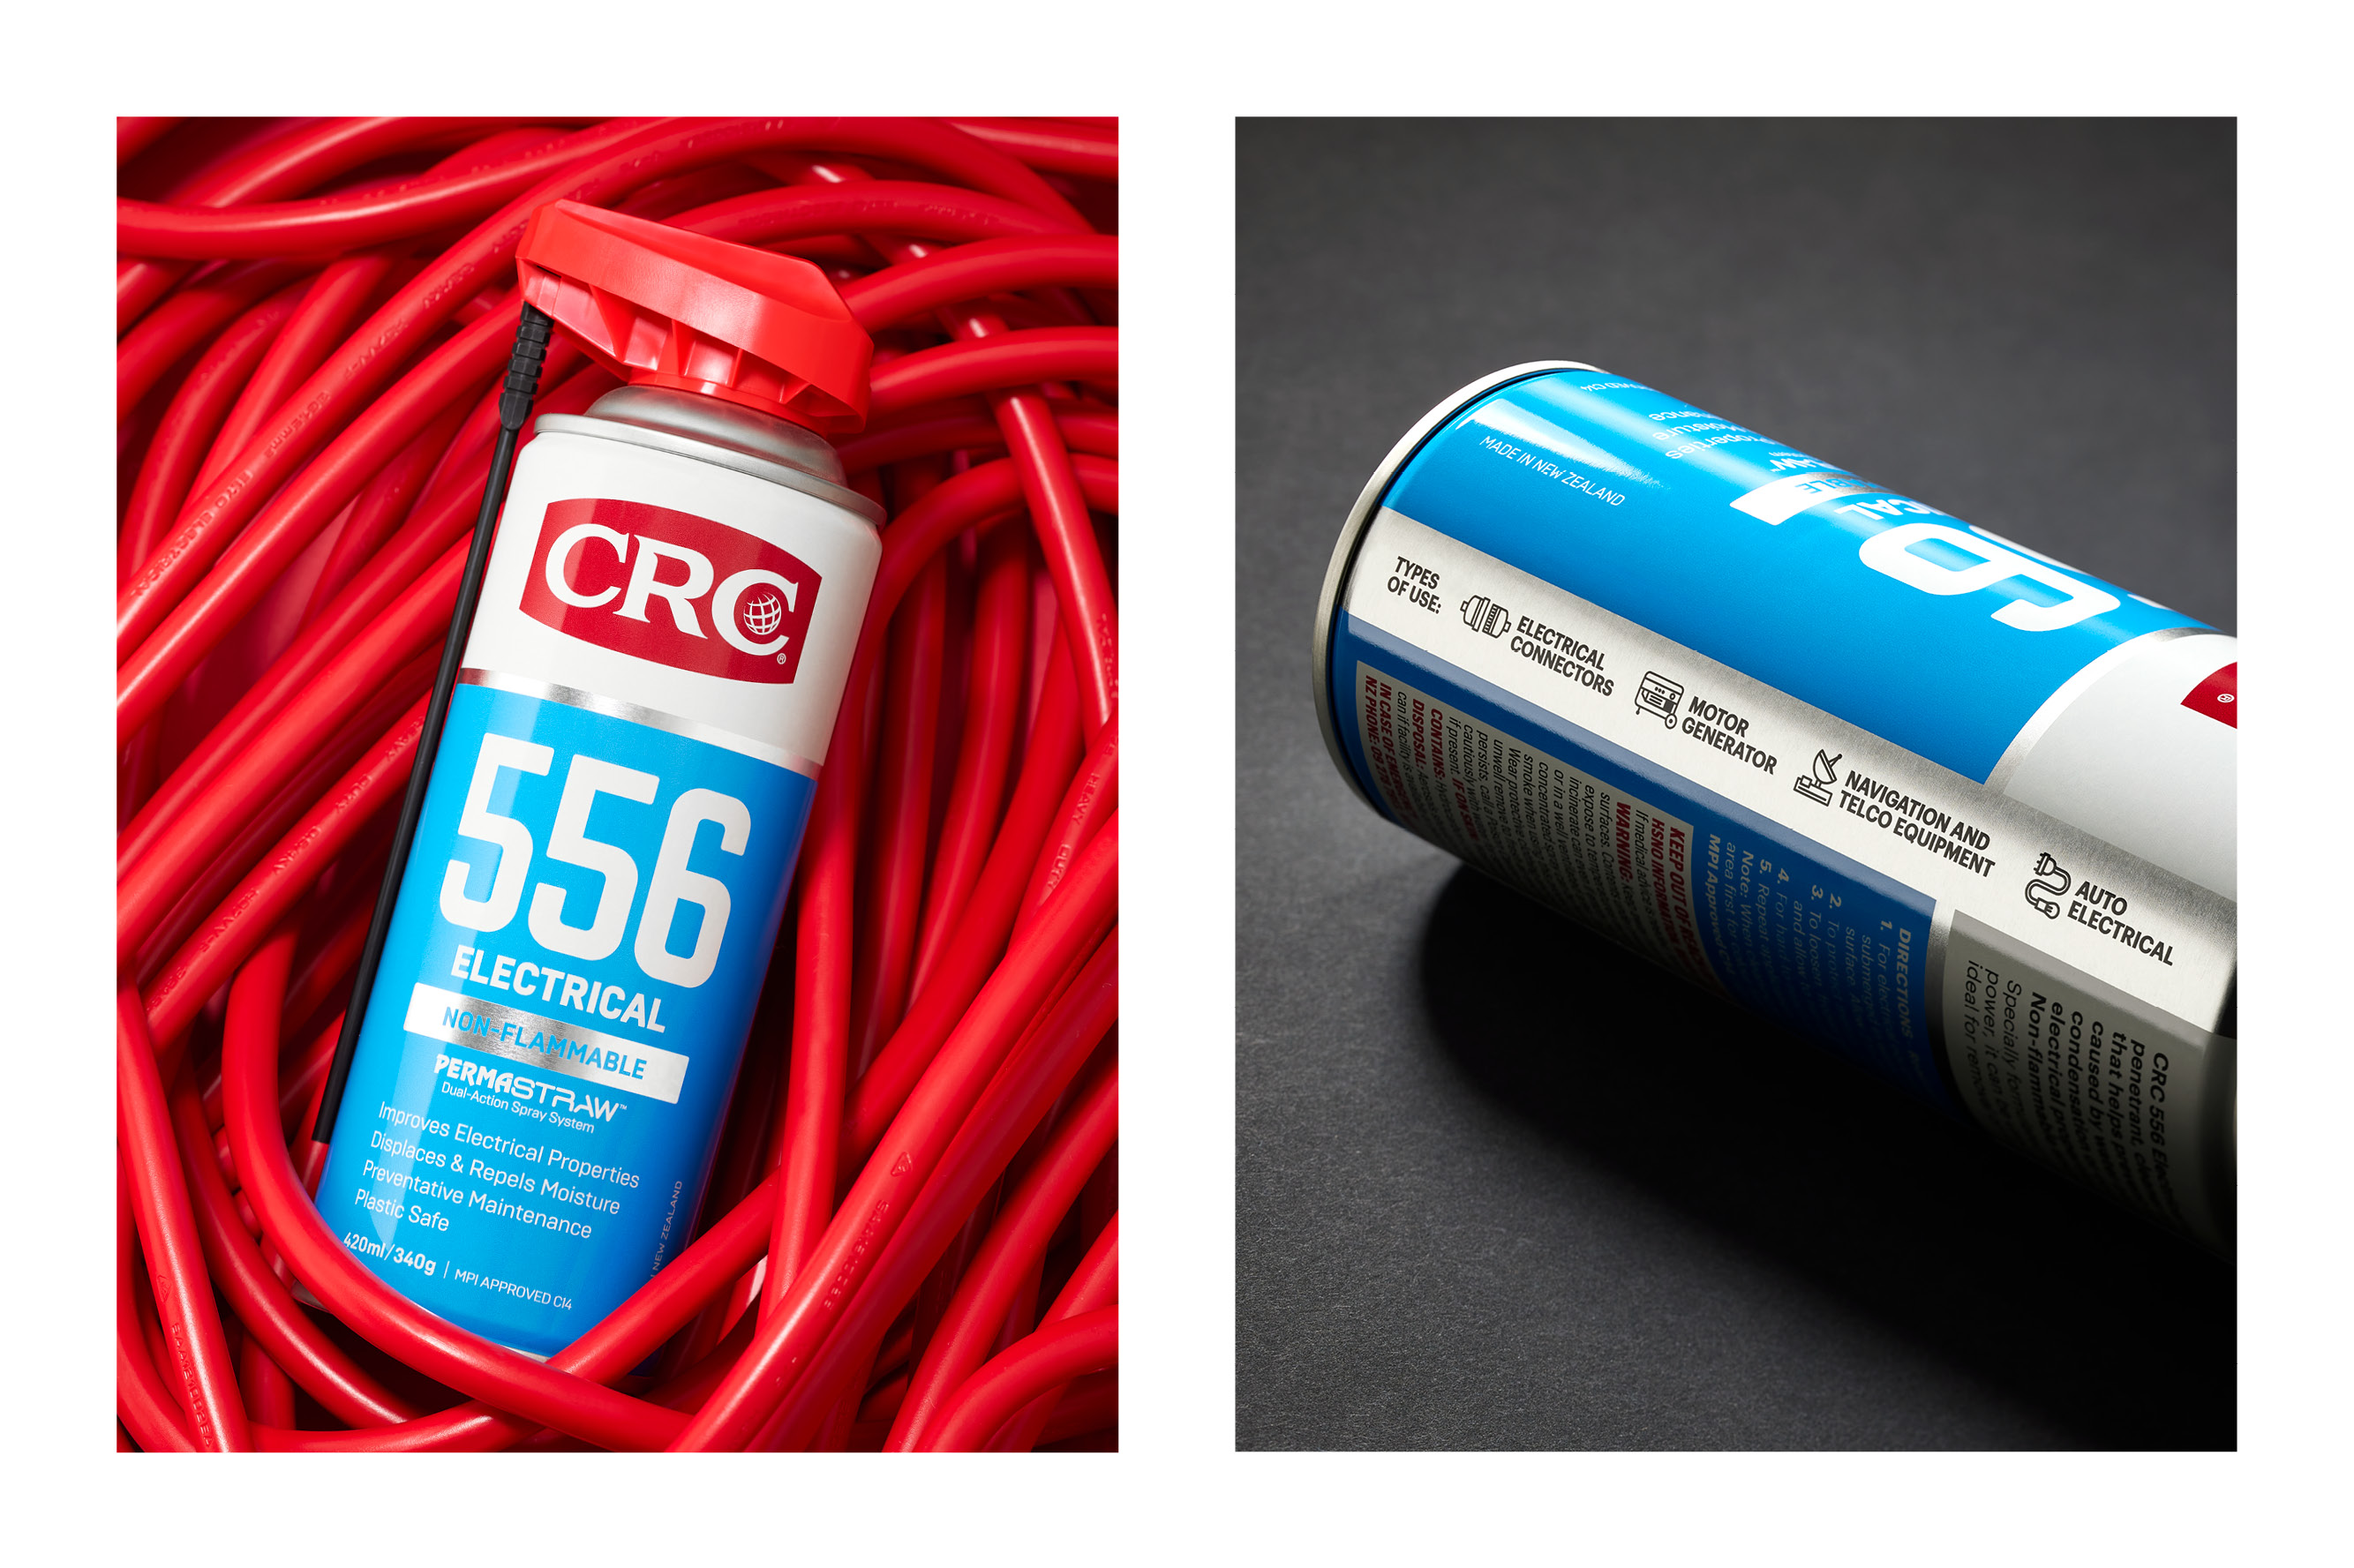 onfire design CRC 556 packaging redesign 23